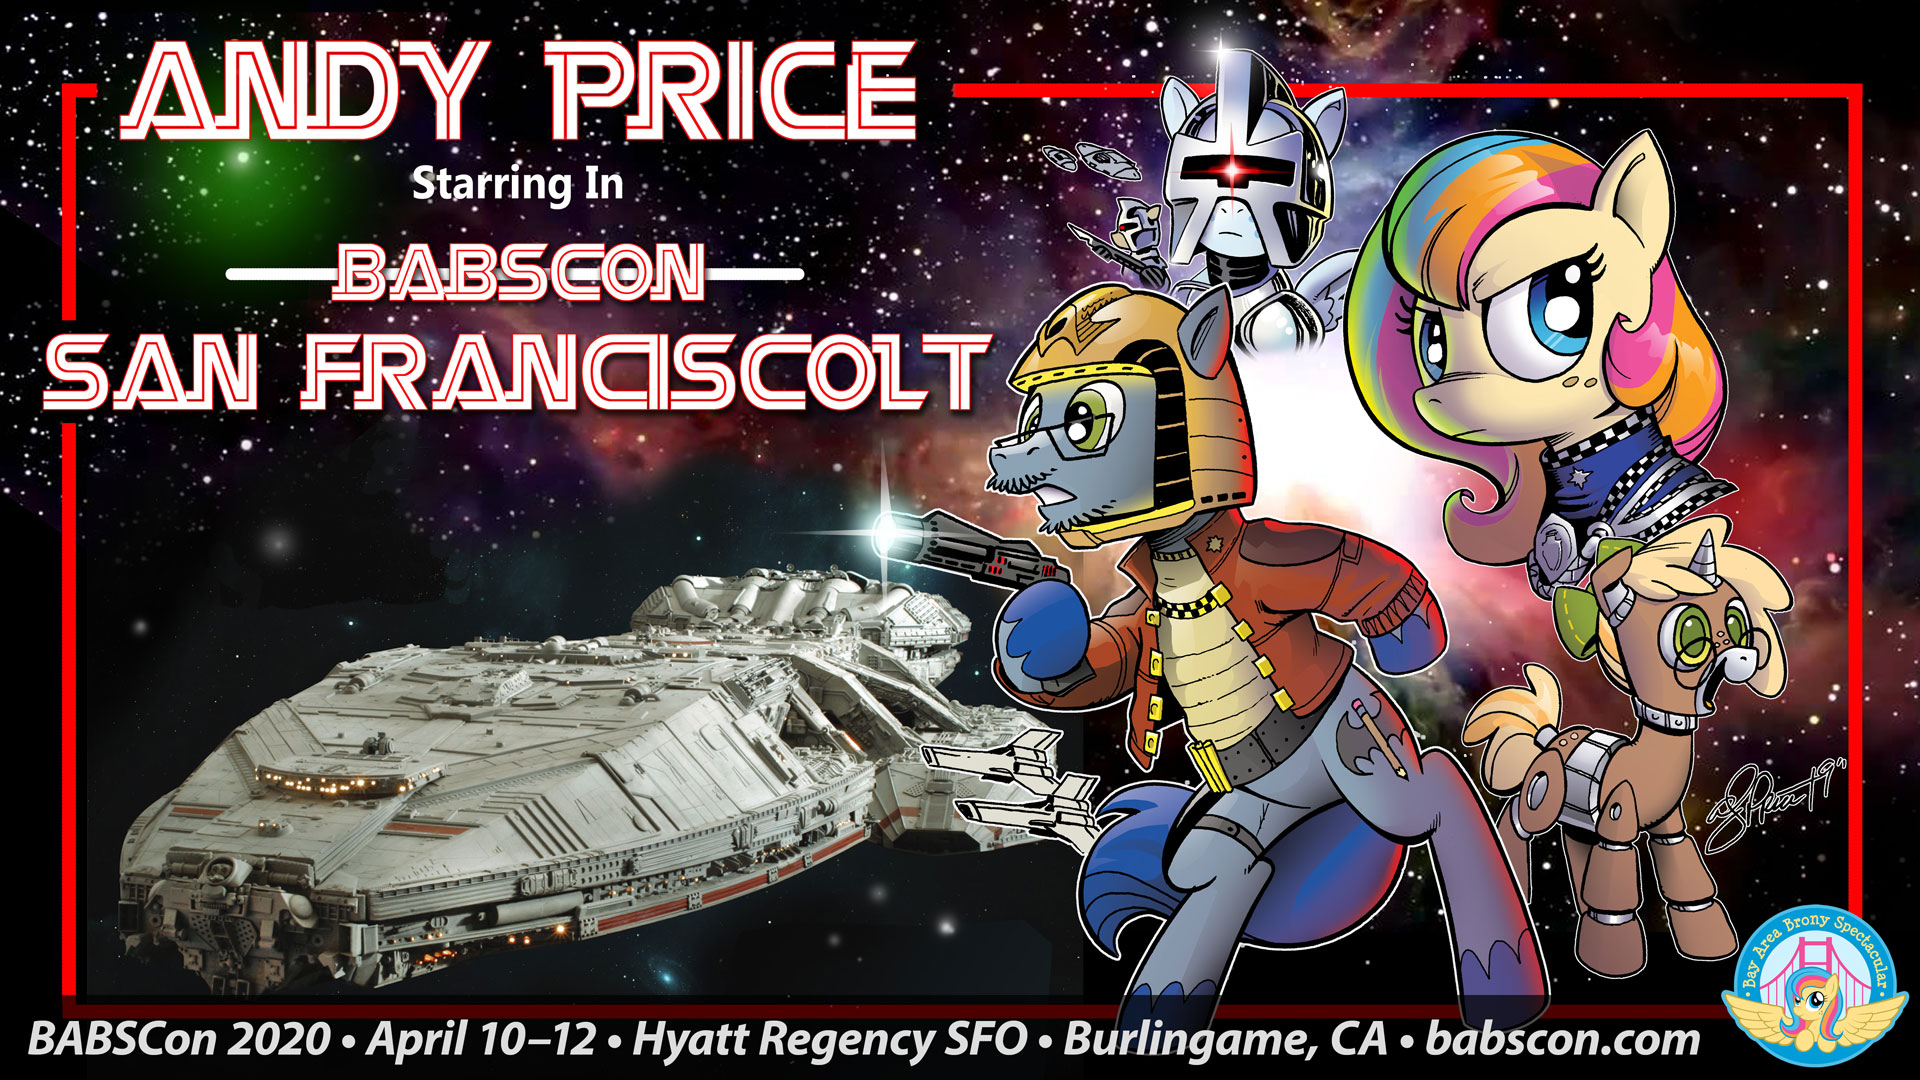 BABSCon Gets Galactic with Andy Price